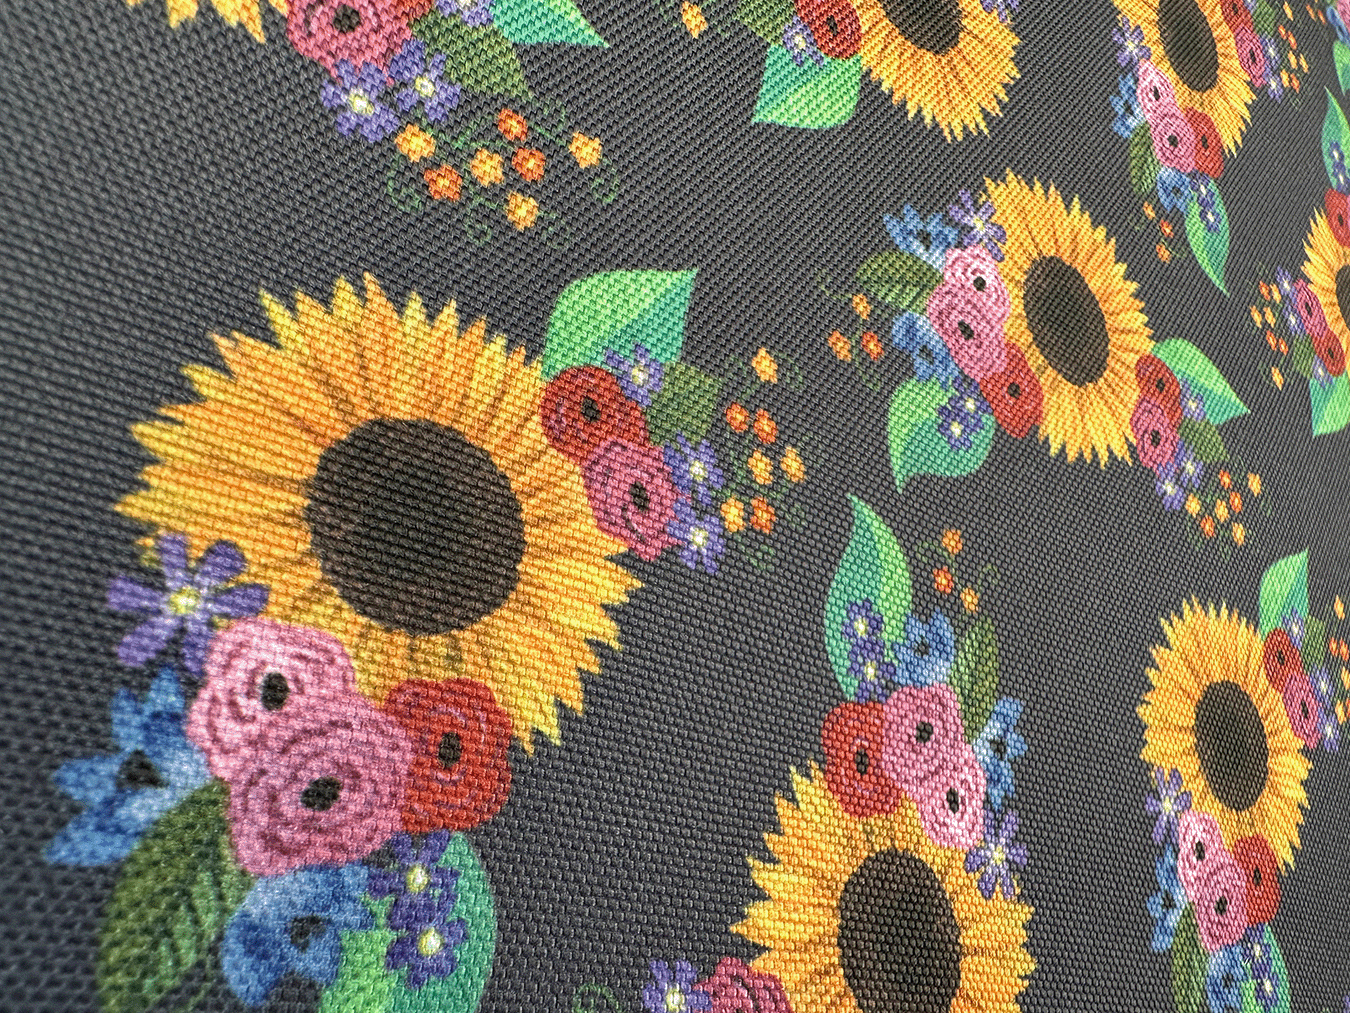 Sunflower, hand painted design, Waterproof Polyester Canvas.